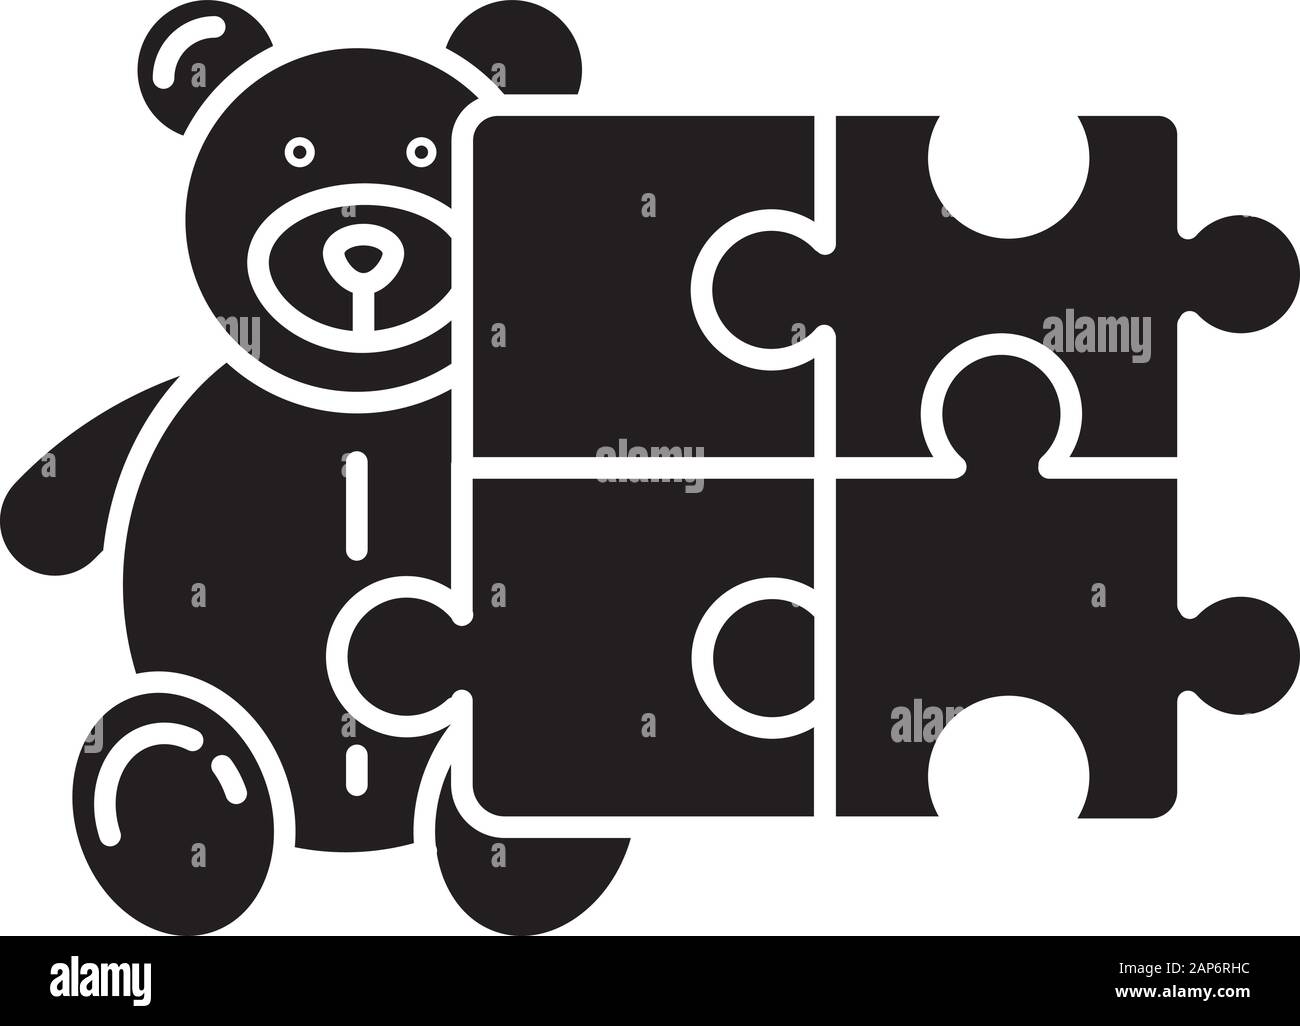 Toys and hobbies glyph icon. Products for babies, children. Kids game. Teddy bear, puzzle. E commerce department, shopping categories. Silhouette symb Stock Vector